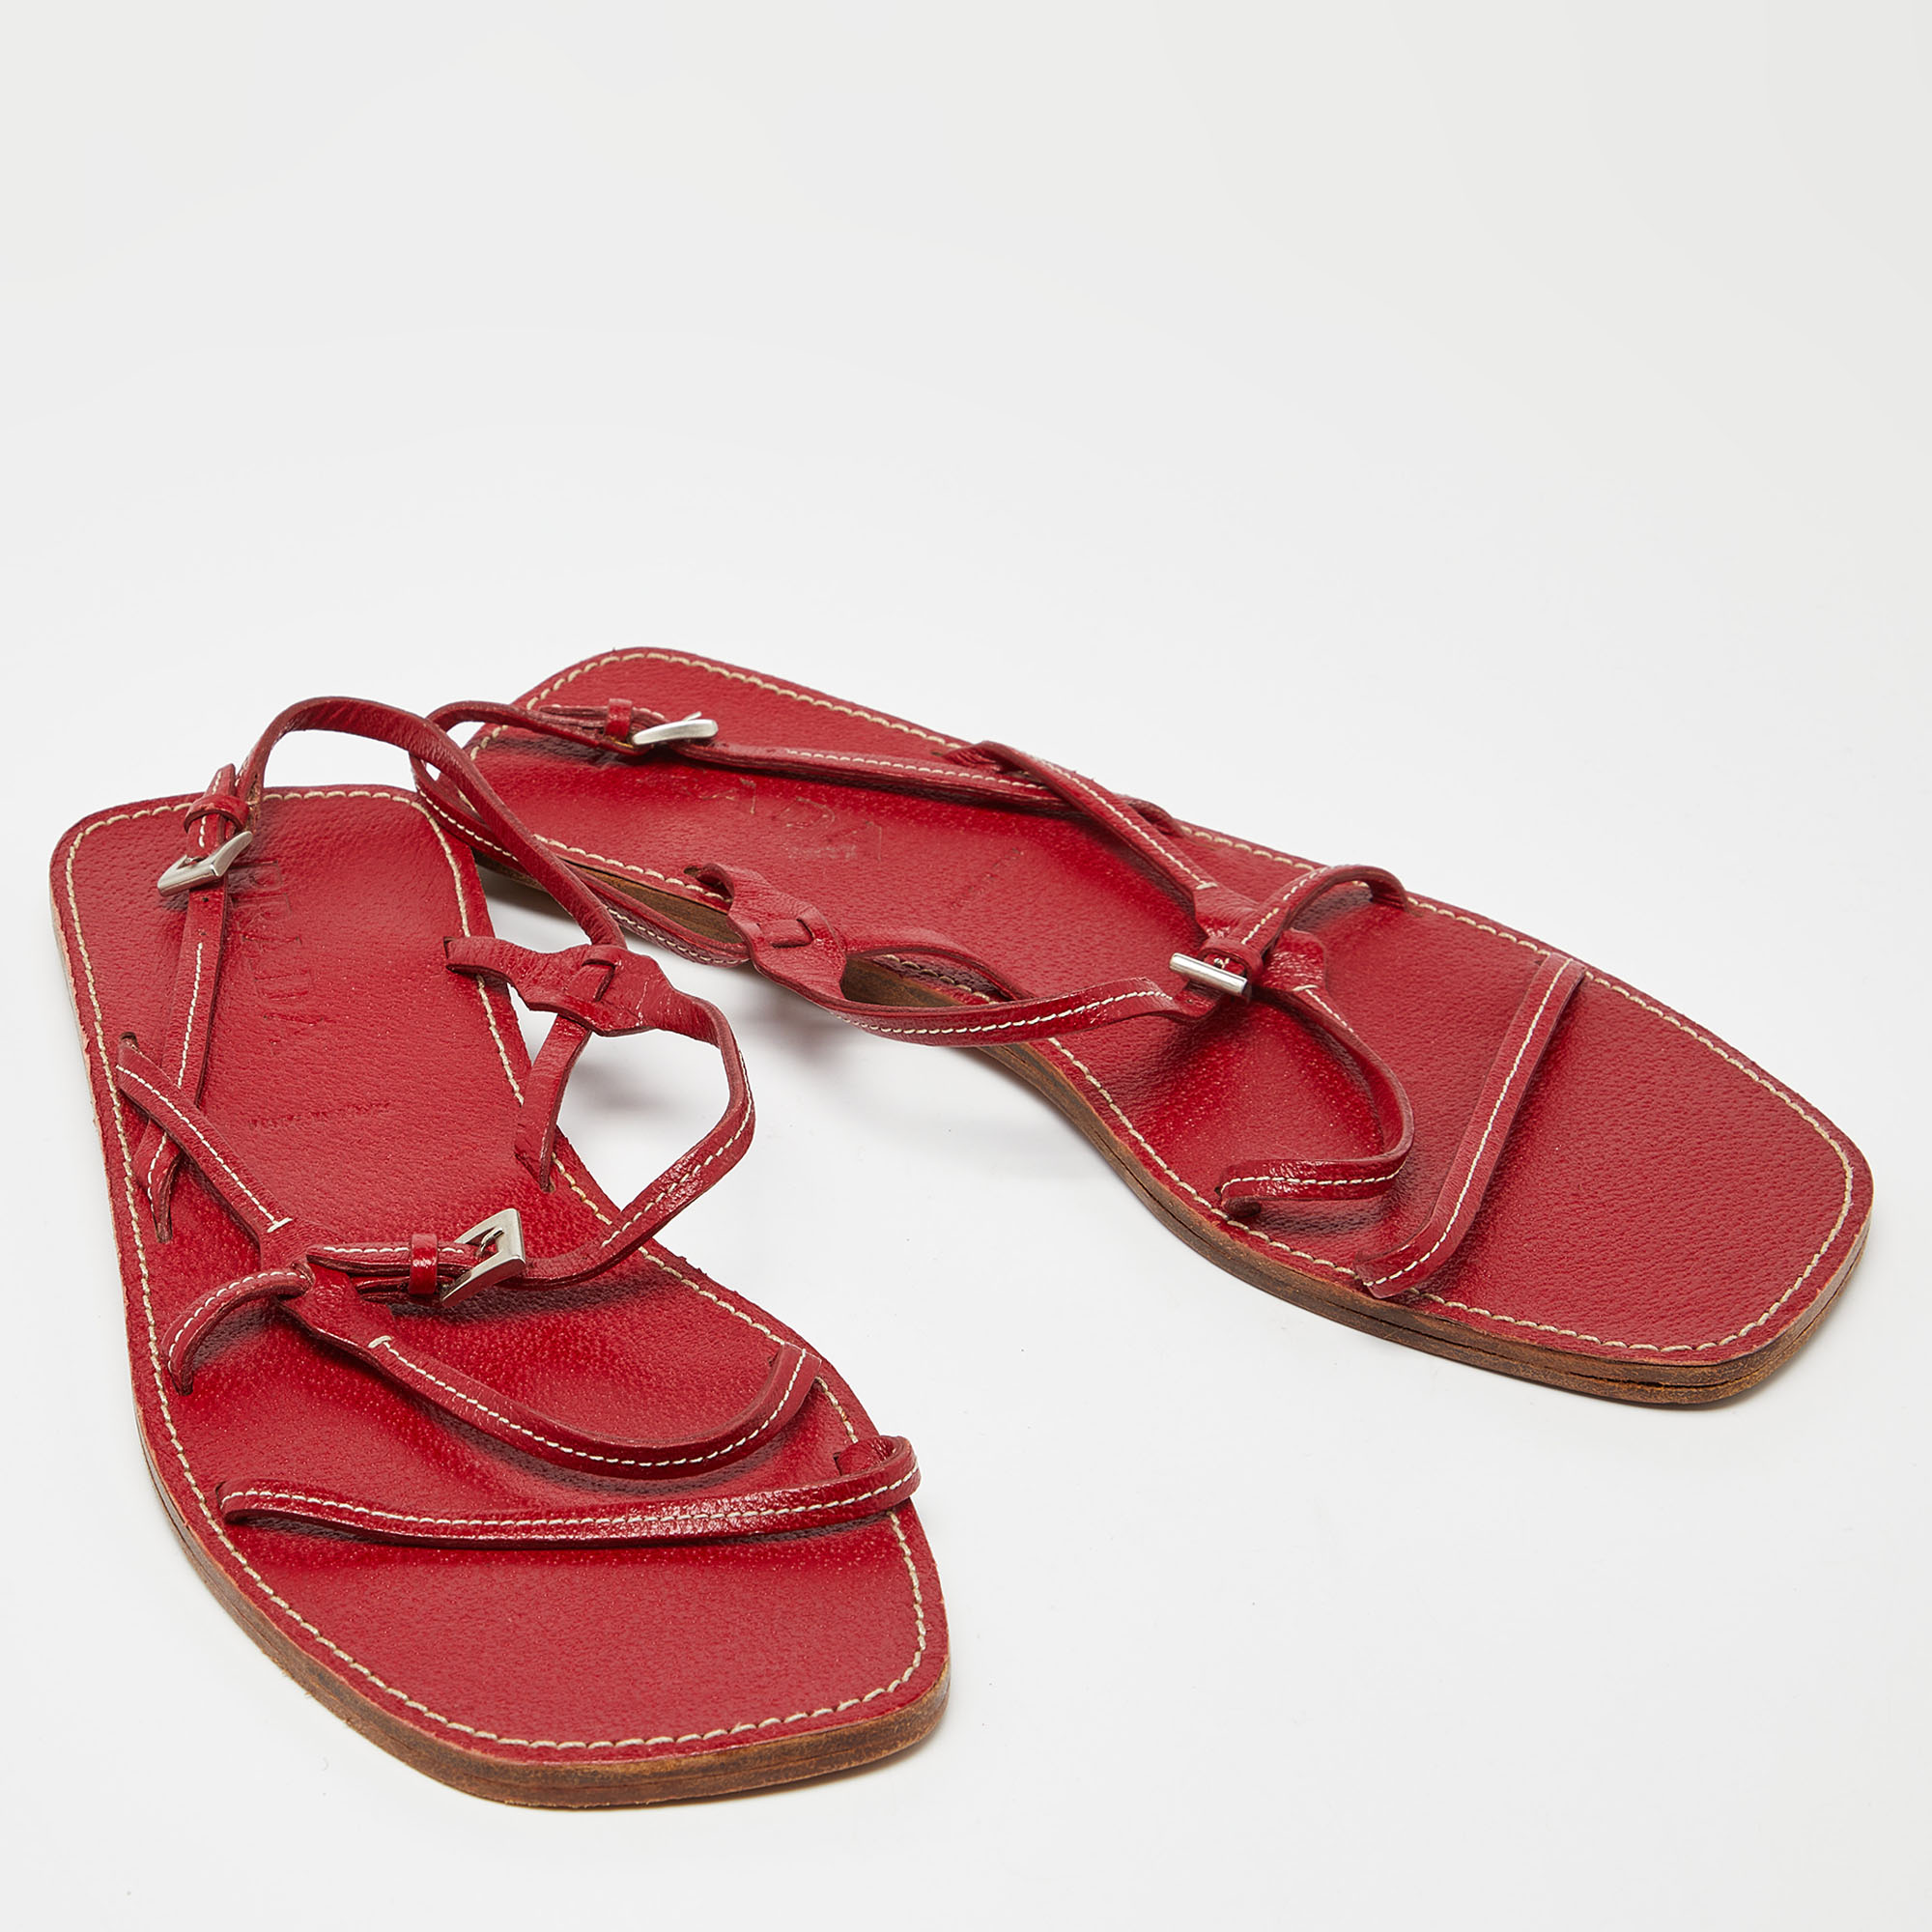 Prada Red Leather Strappy Flat Sandals Size 39